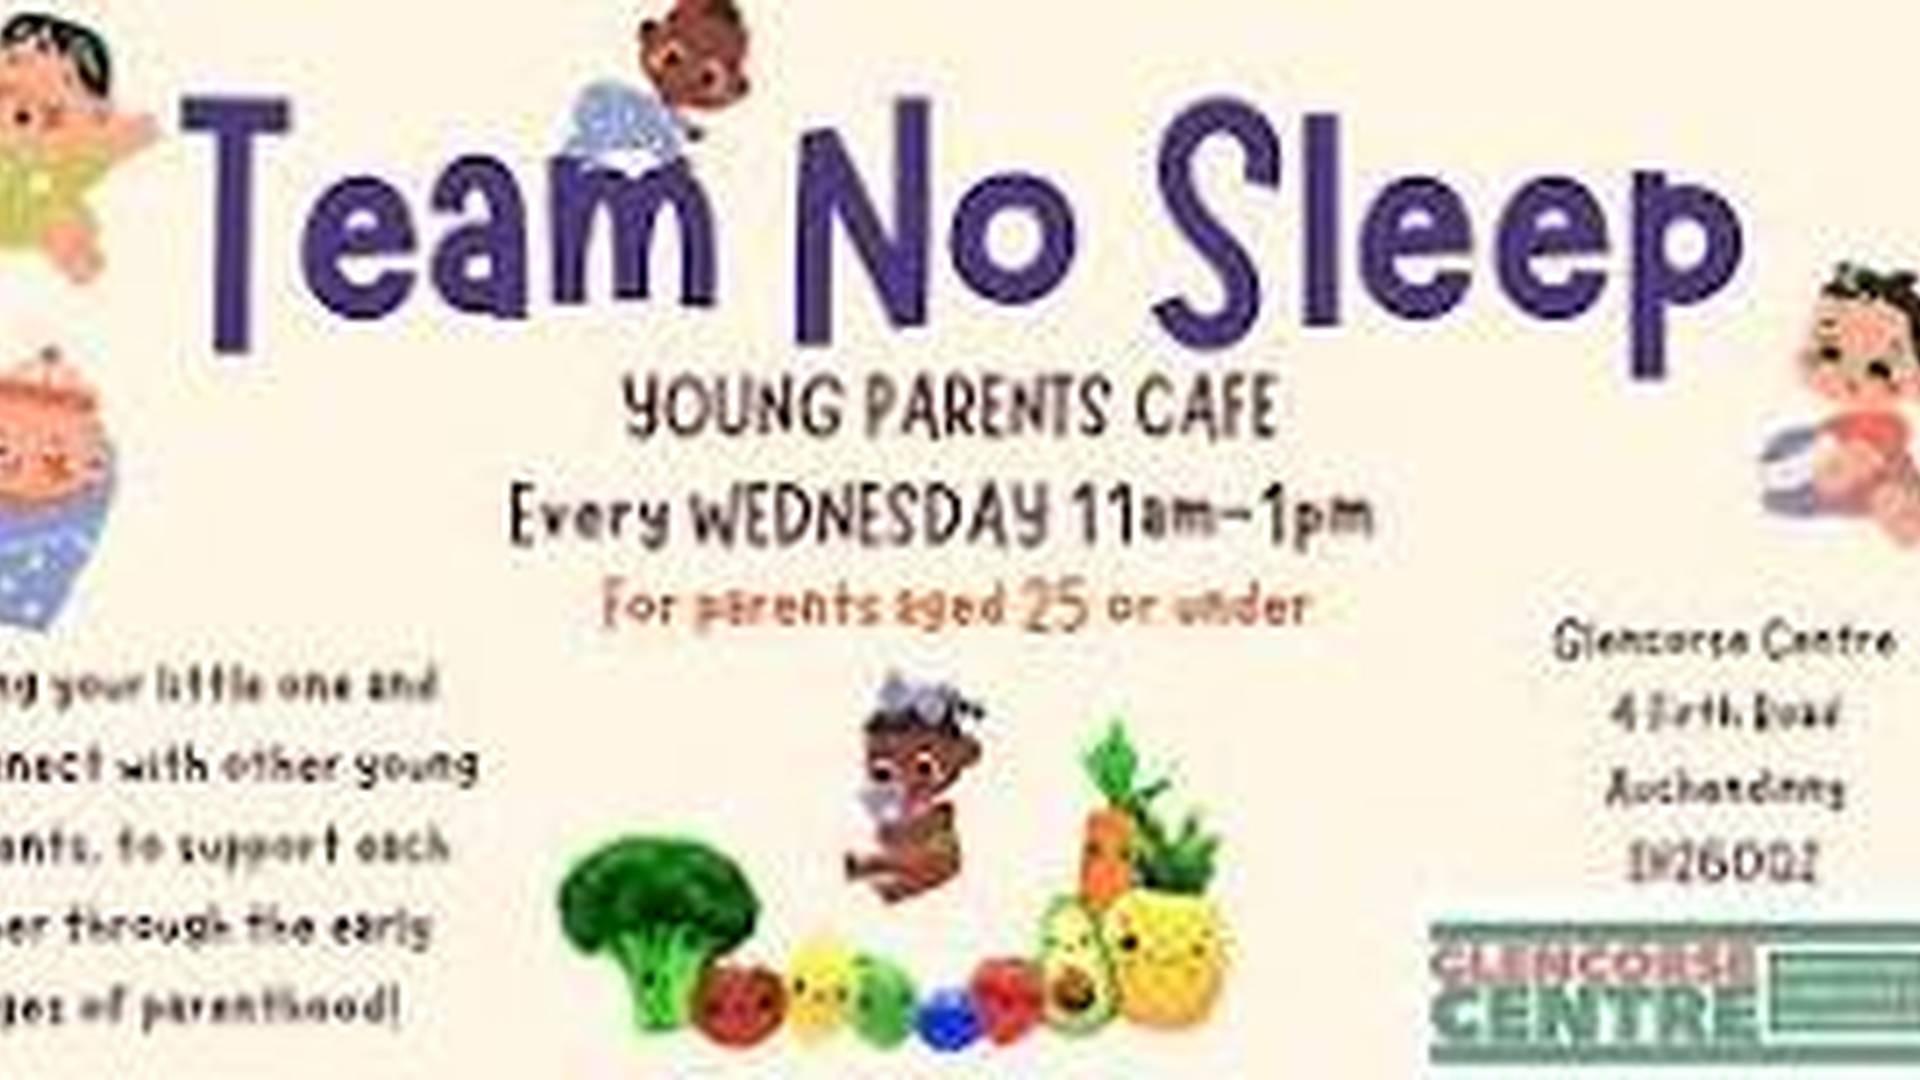 Team No Sleep - Young Parents Weekly Cafe photo